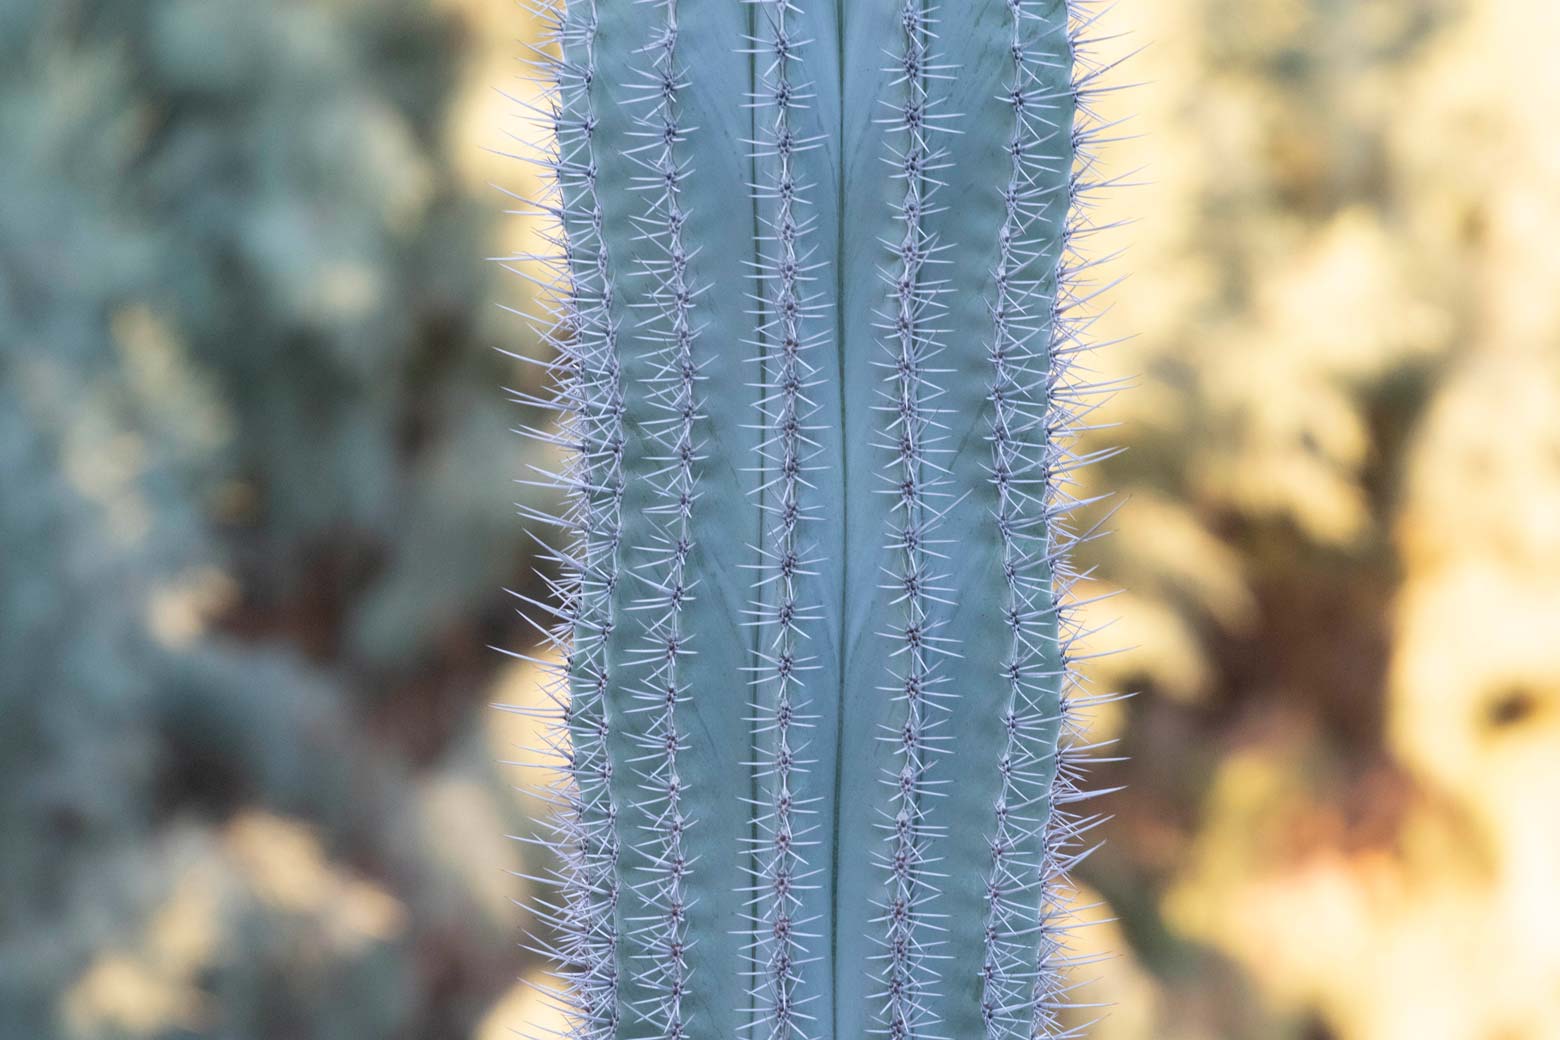 A close-up of the ribs and spines of a Cardon cactus.